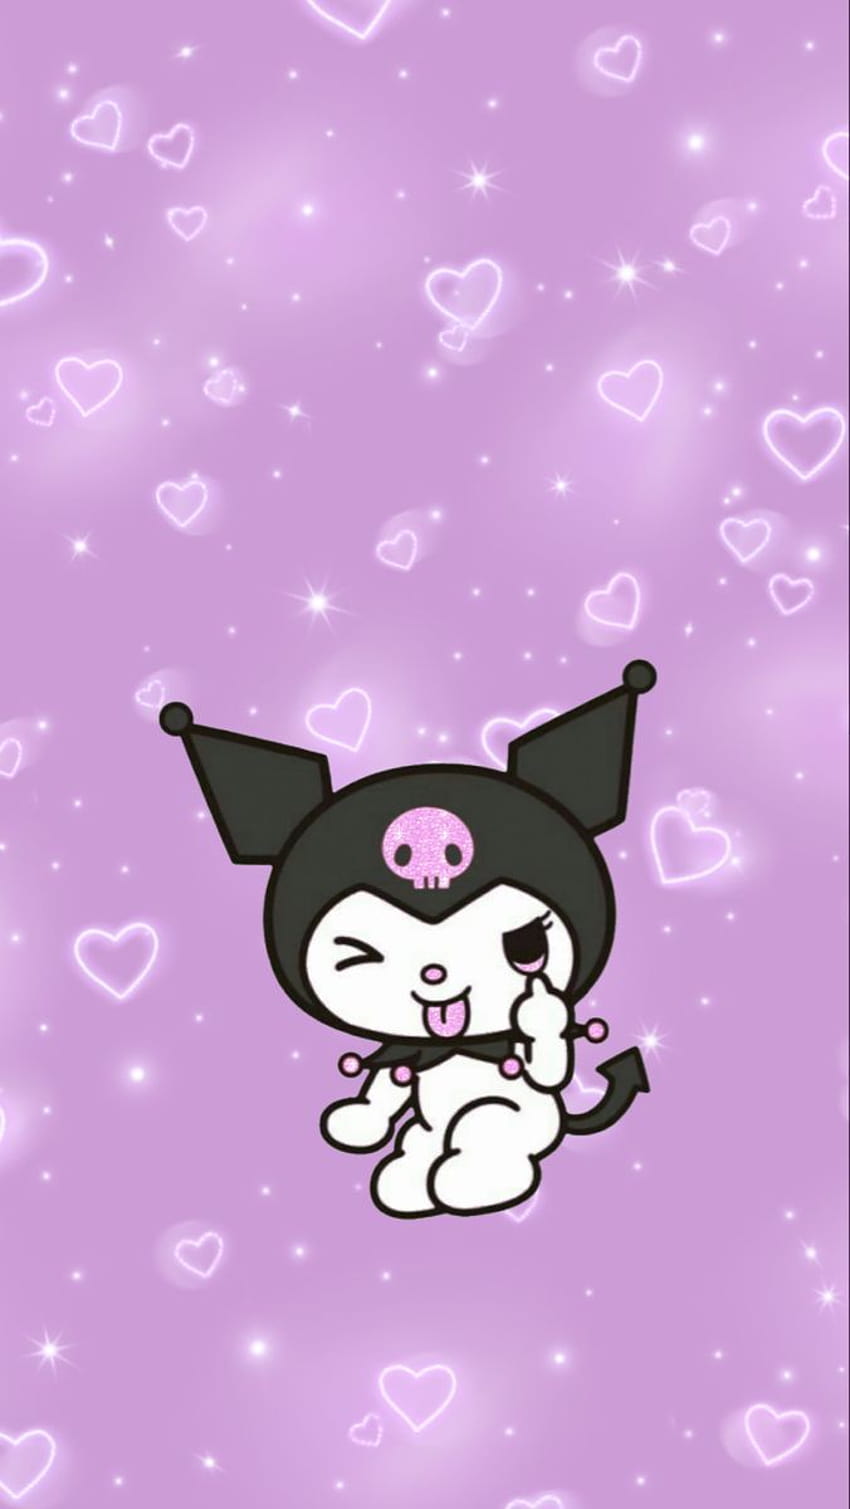 Distinctive Purple wallpaper kuromi Pictures, Clips, and Articles